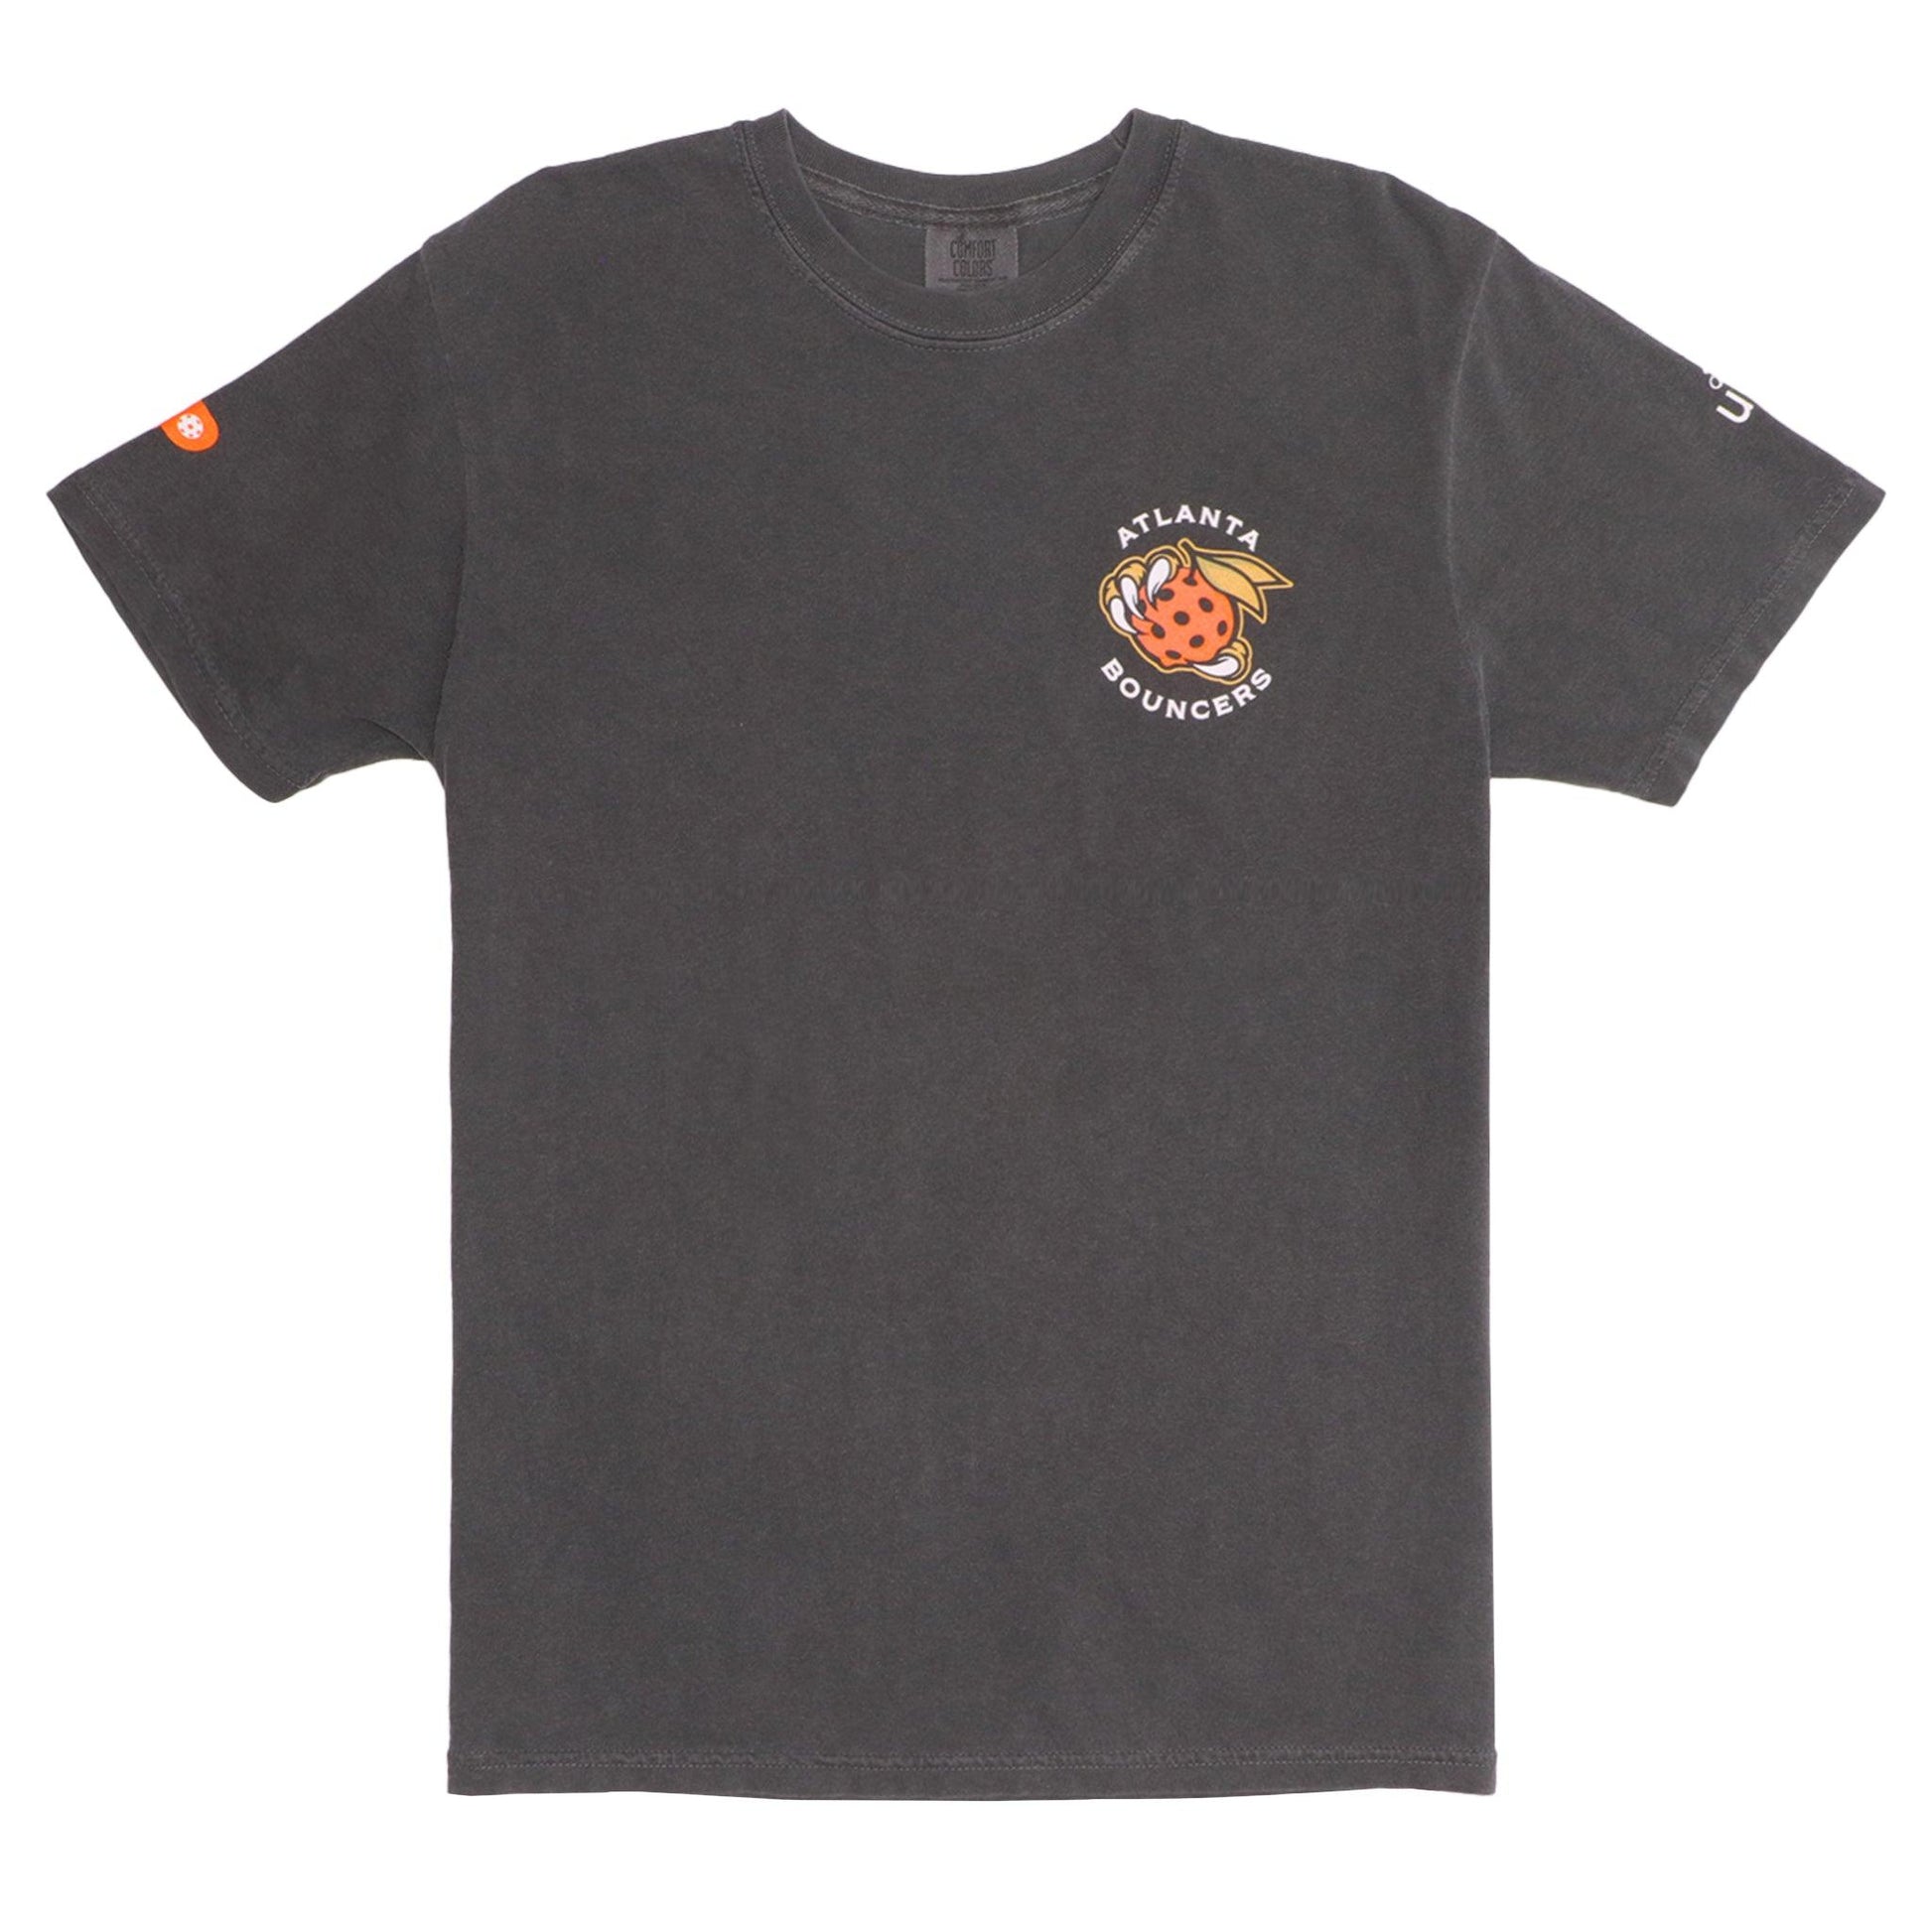 front of grey shirt with atlanta bouncers logo on left chest 